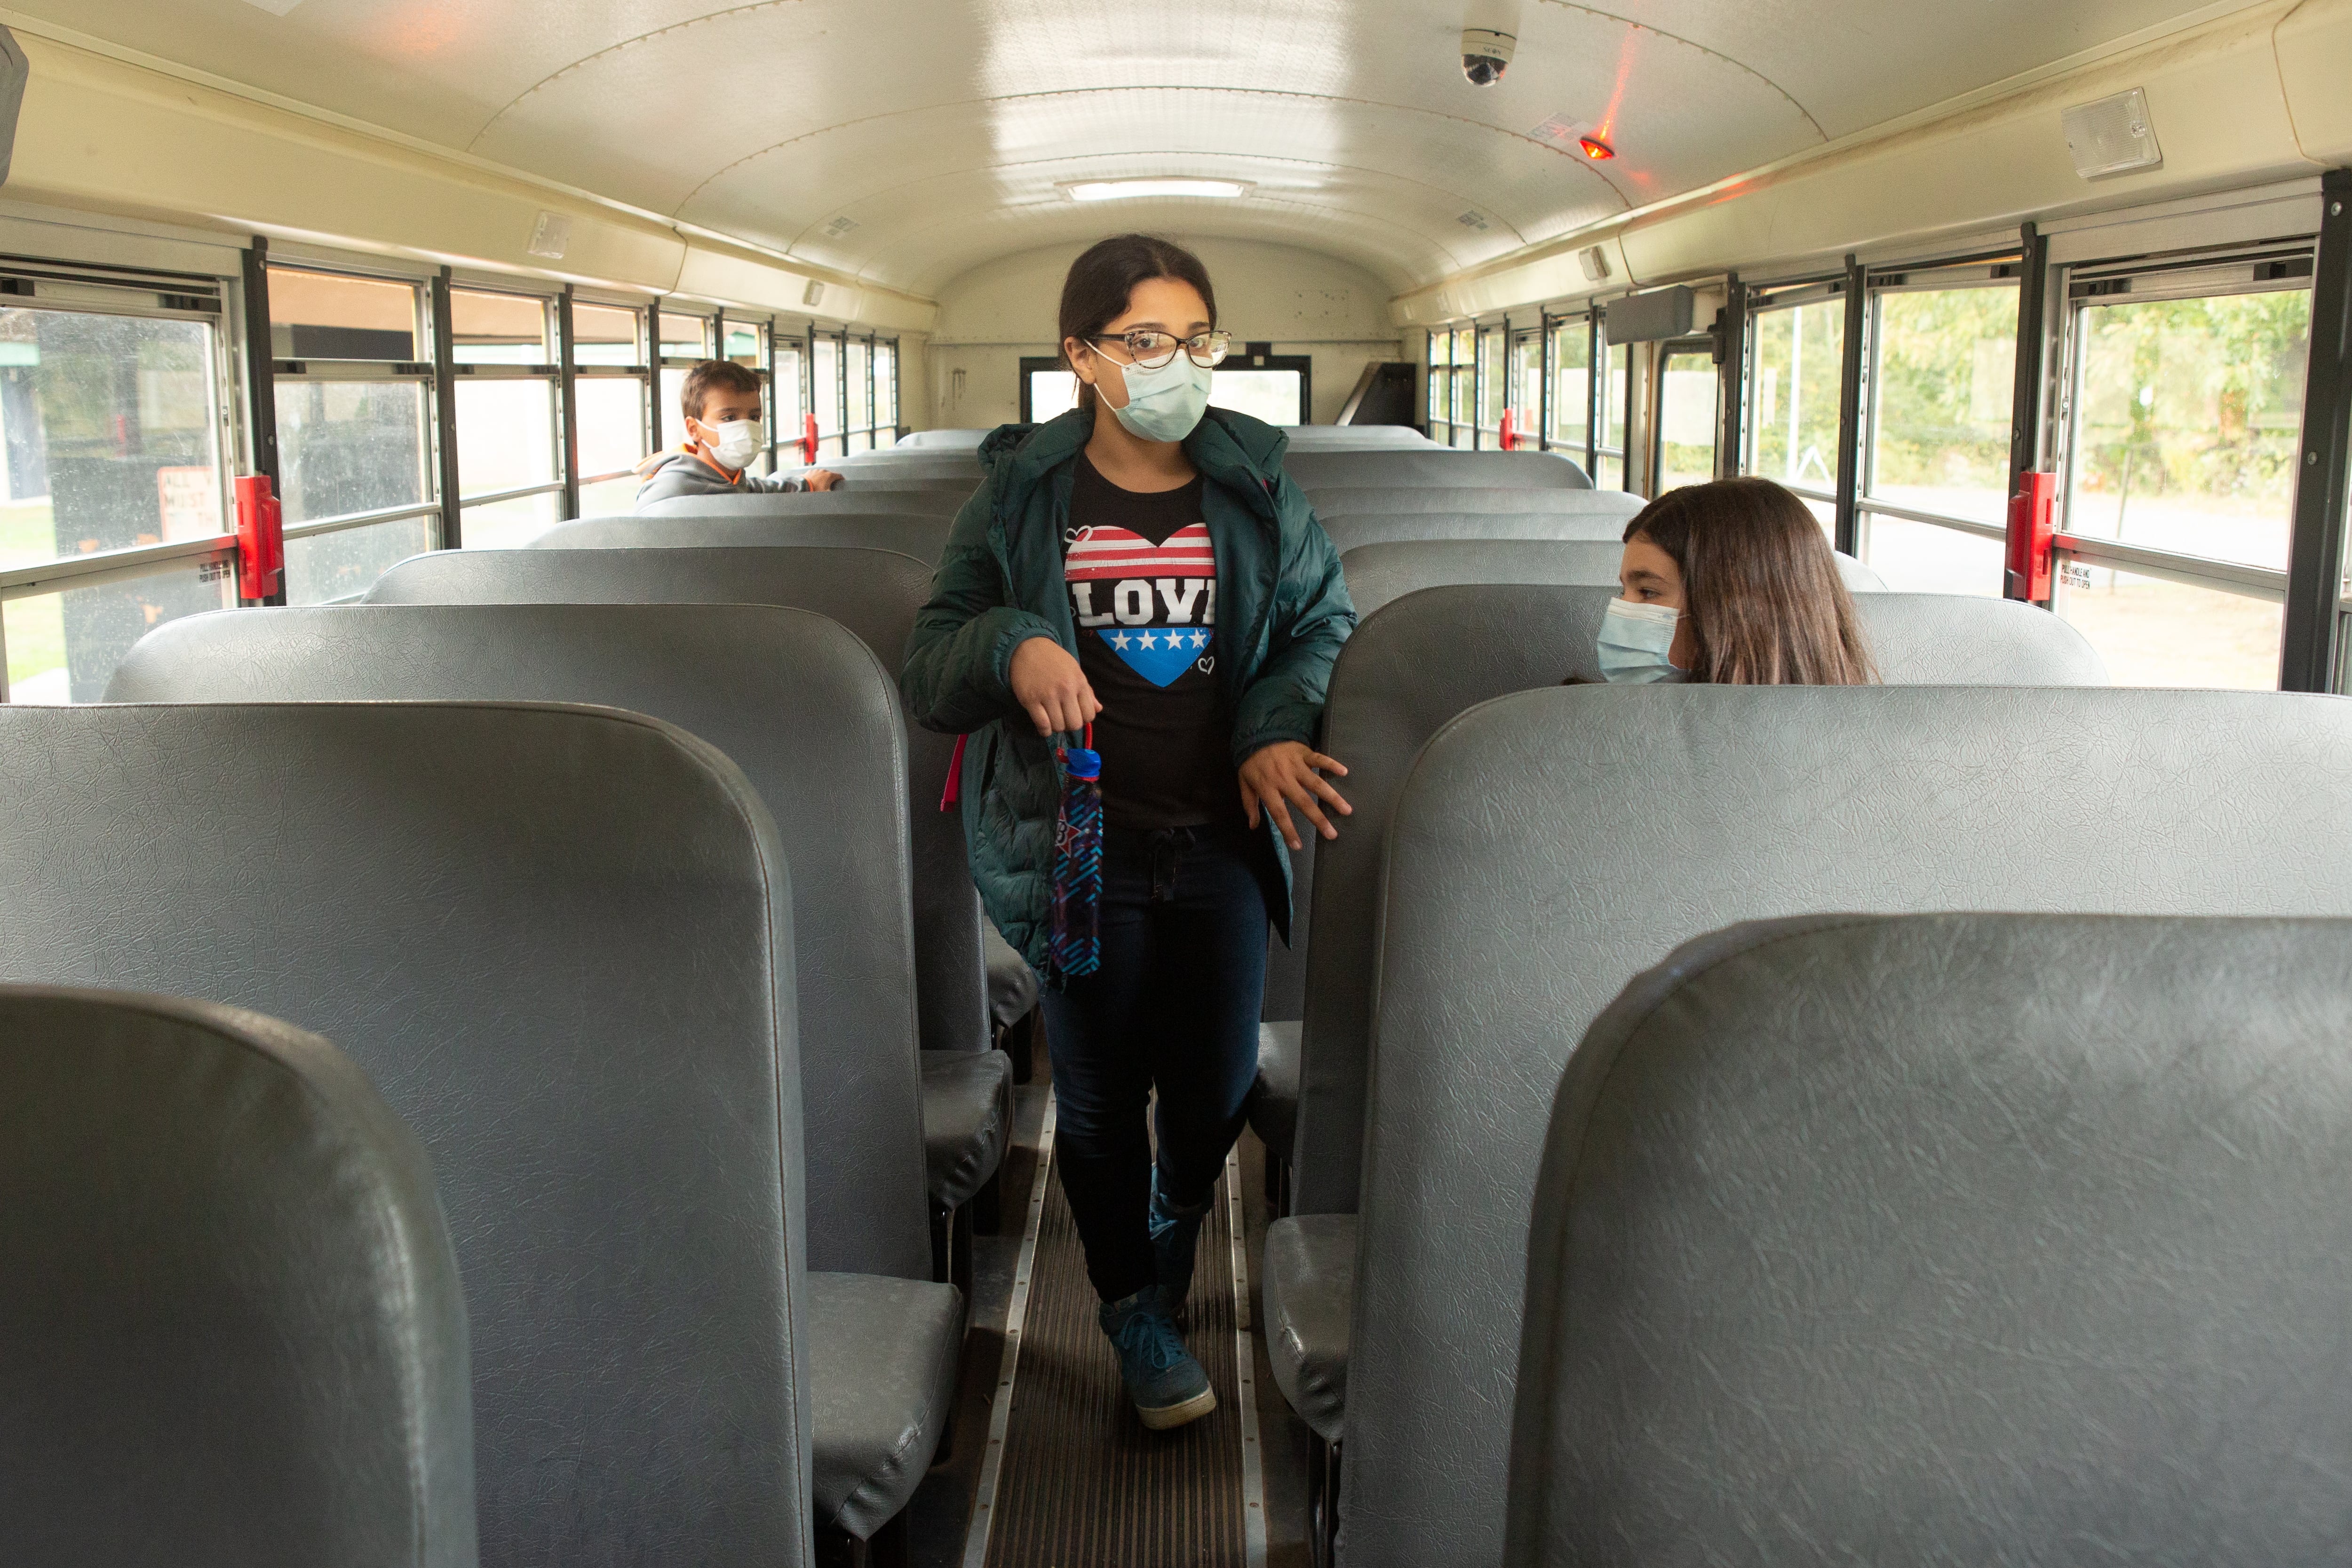 Two fifth graders sit on opposite sides of a school bus while one girl, wearing glasses and a mask and a black T-shirt emblazoned with a red-and-blue heart saying “LOVE” and carrying an umbrella, walks toward the back of the bus.